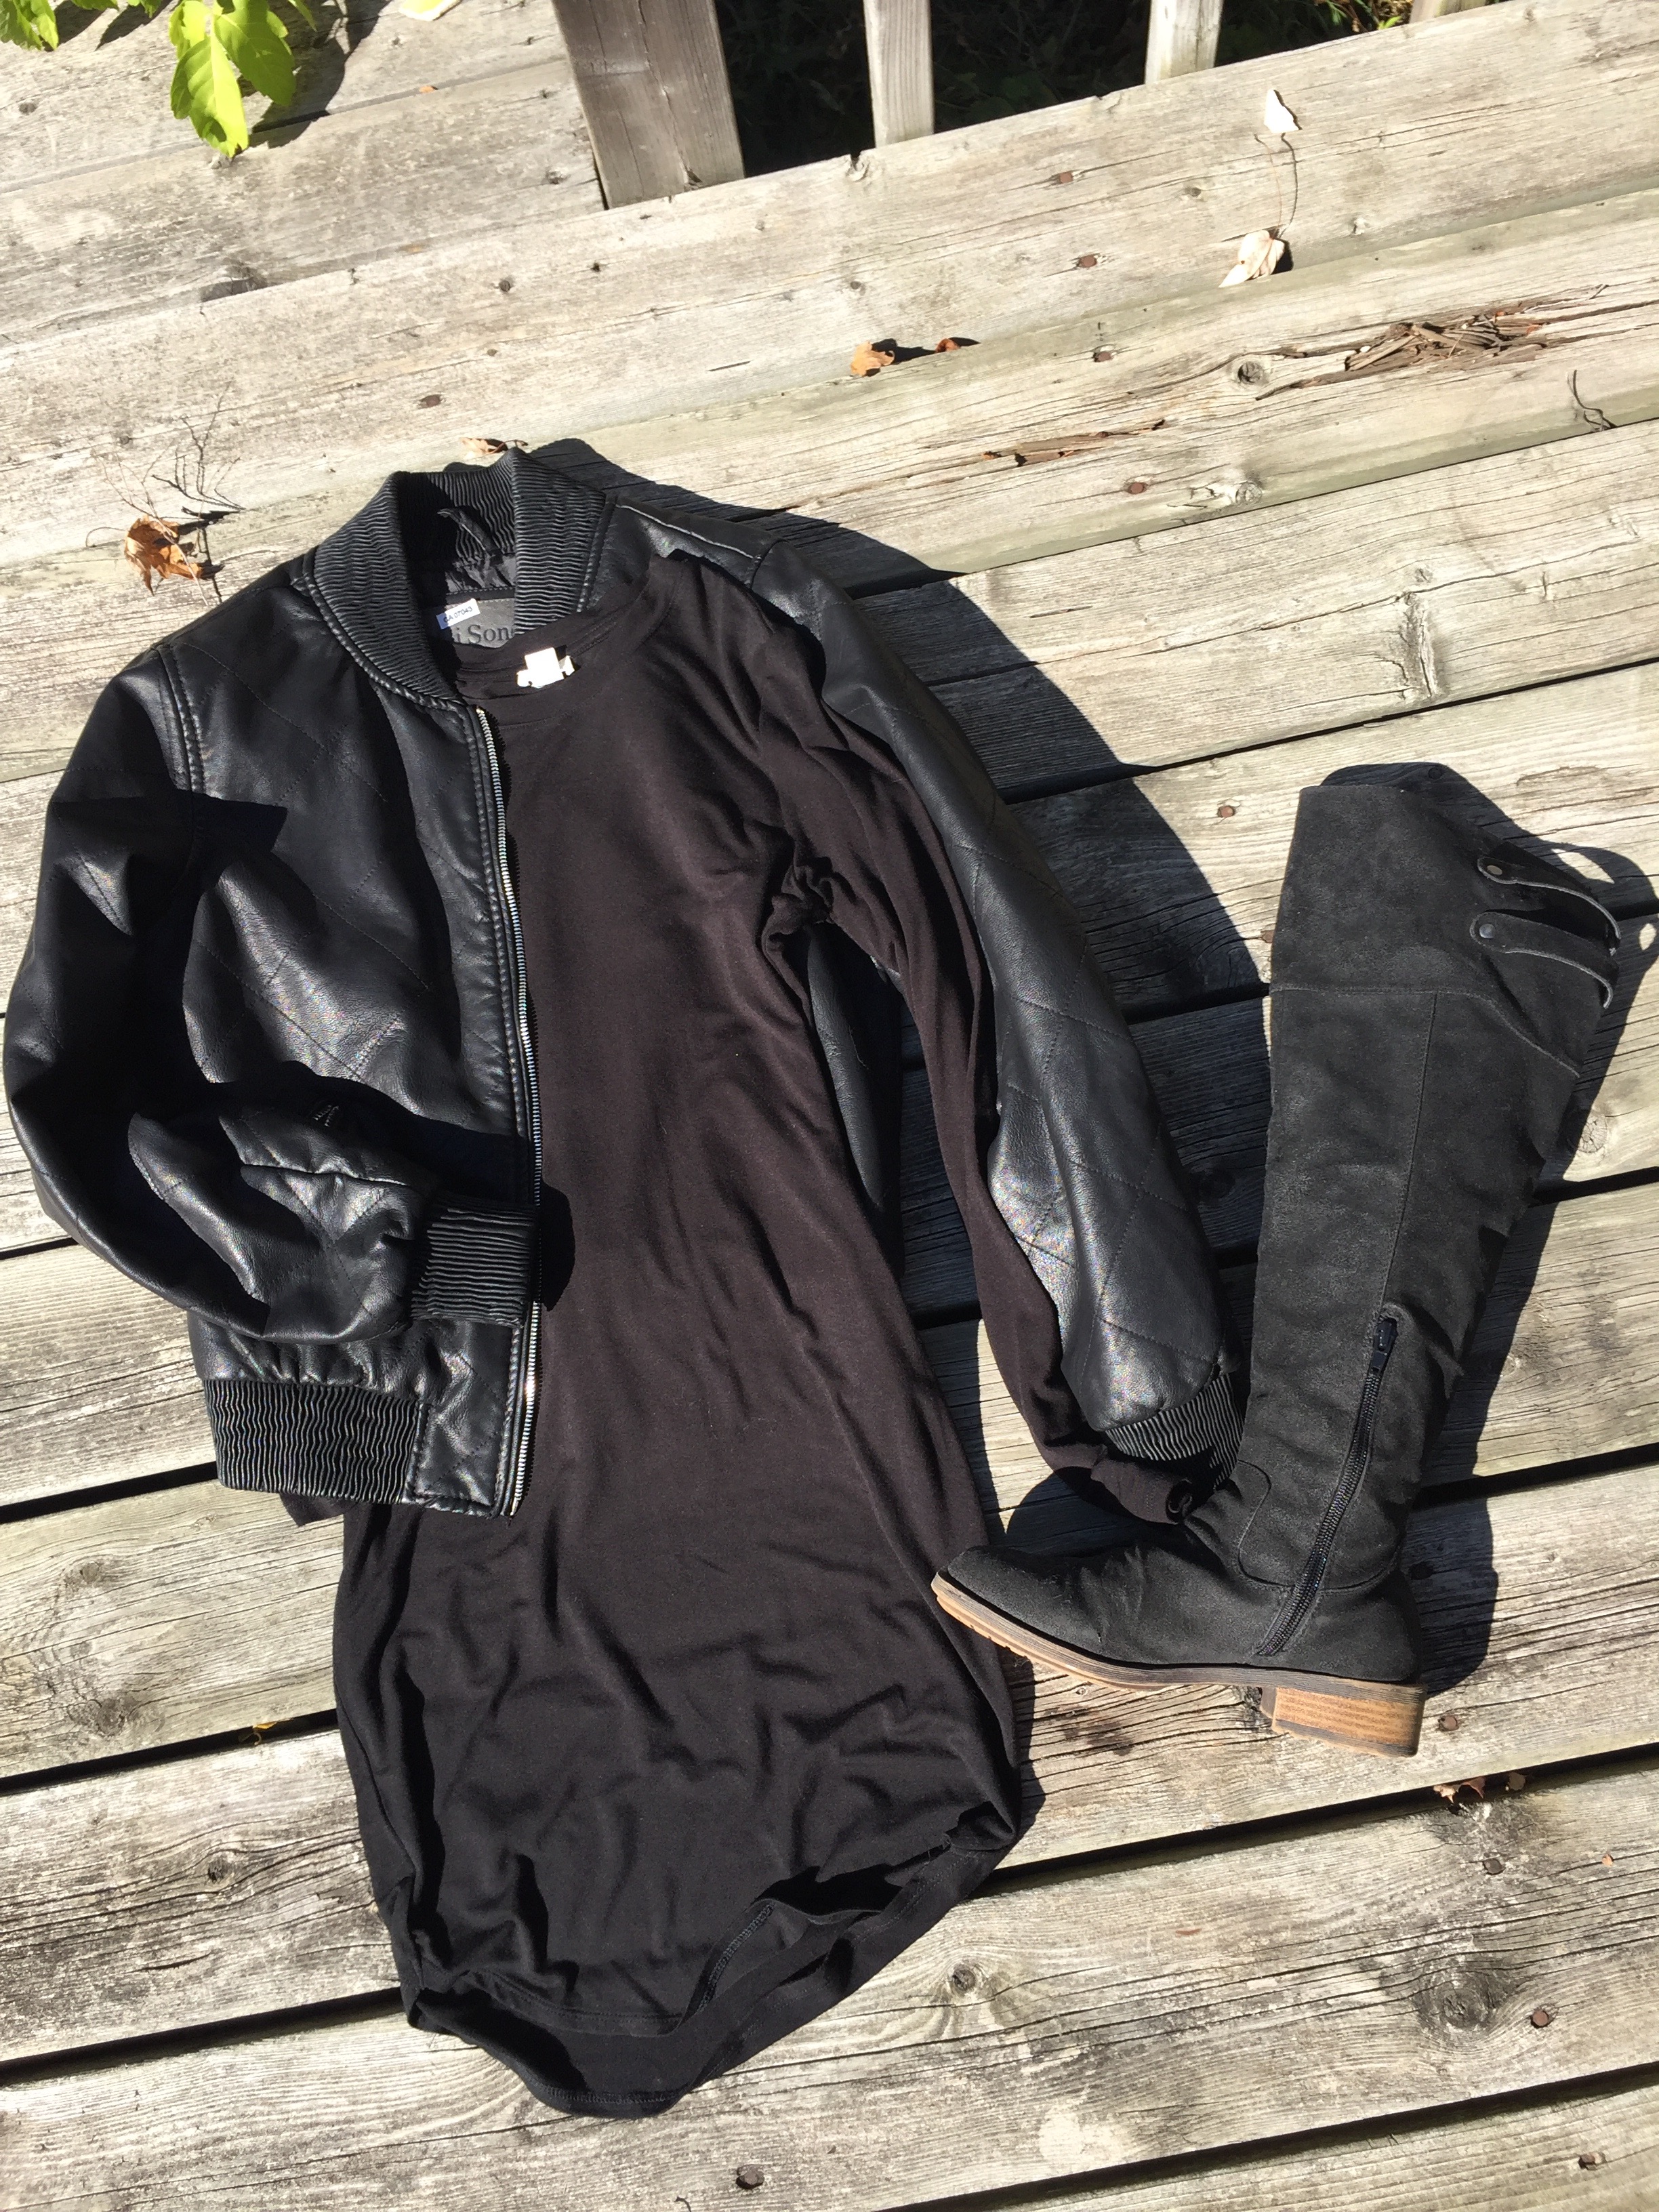 Black Long Sleeve Dress with Faux Leather Jacket and Black Knee High Boots